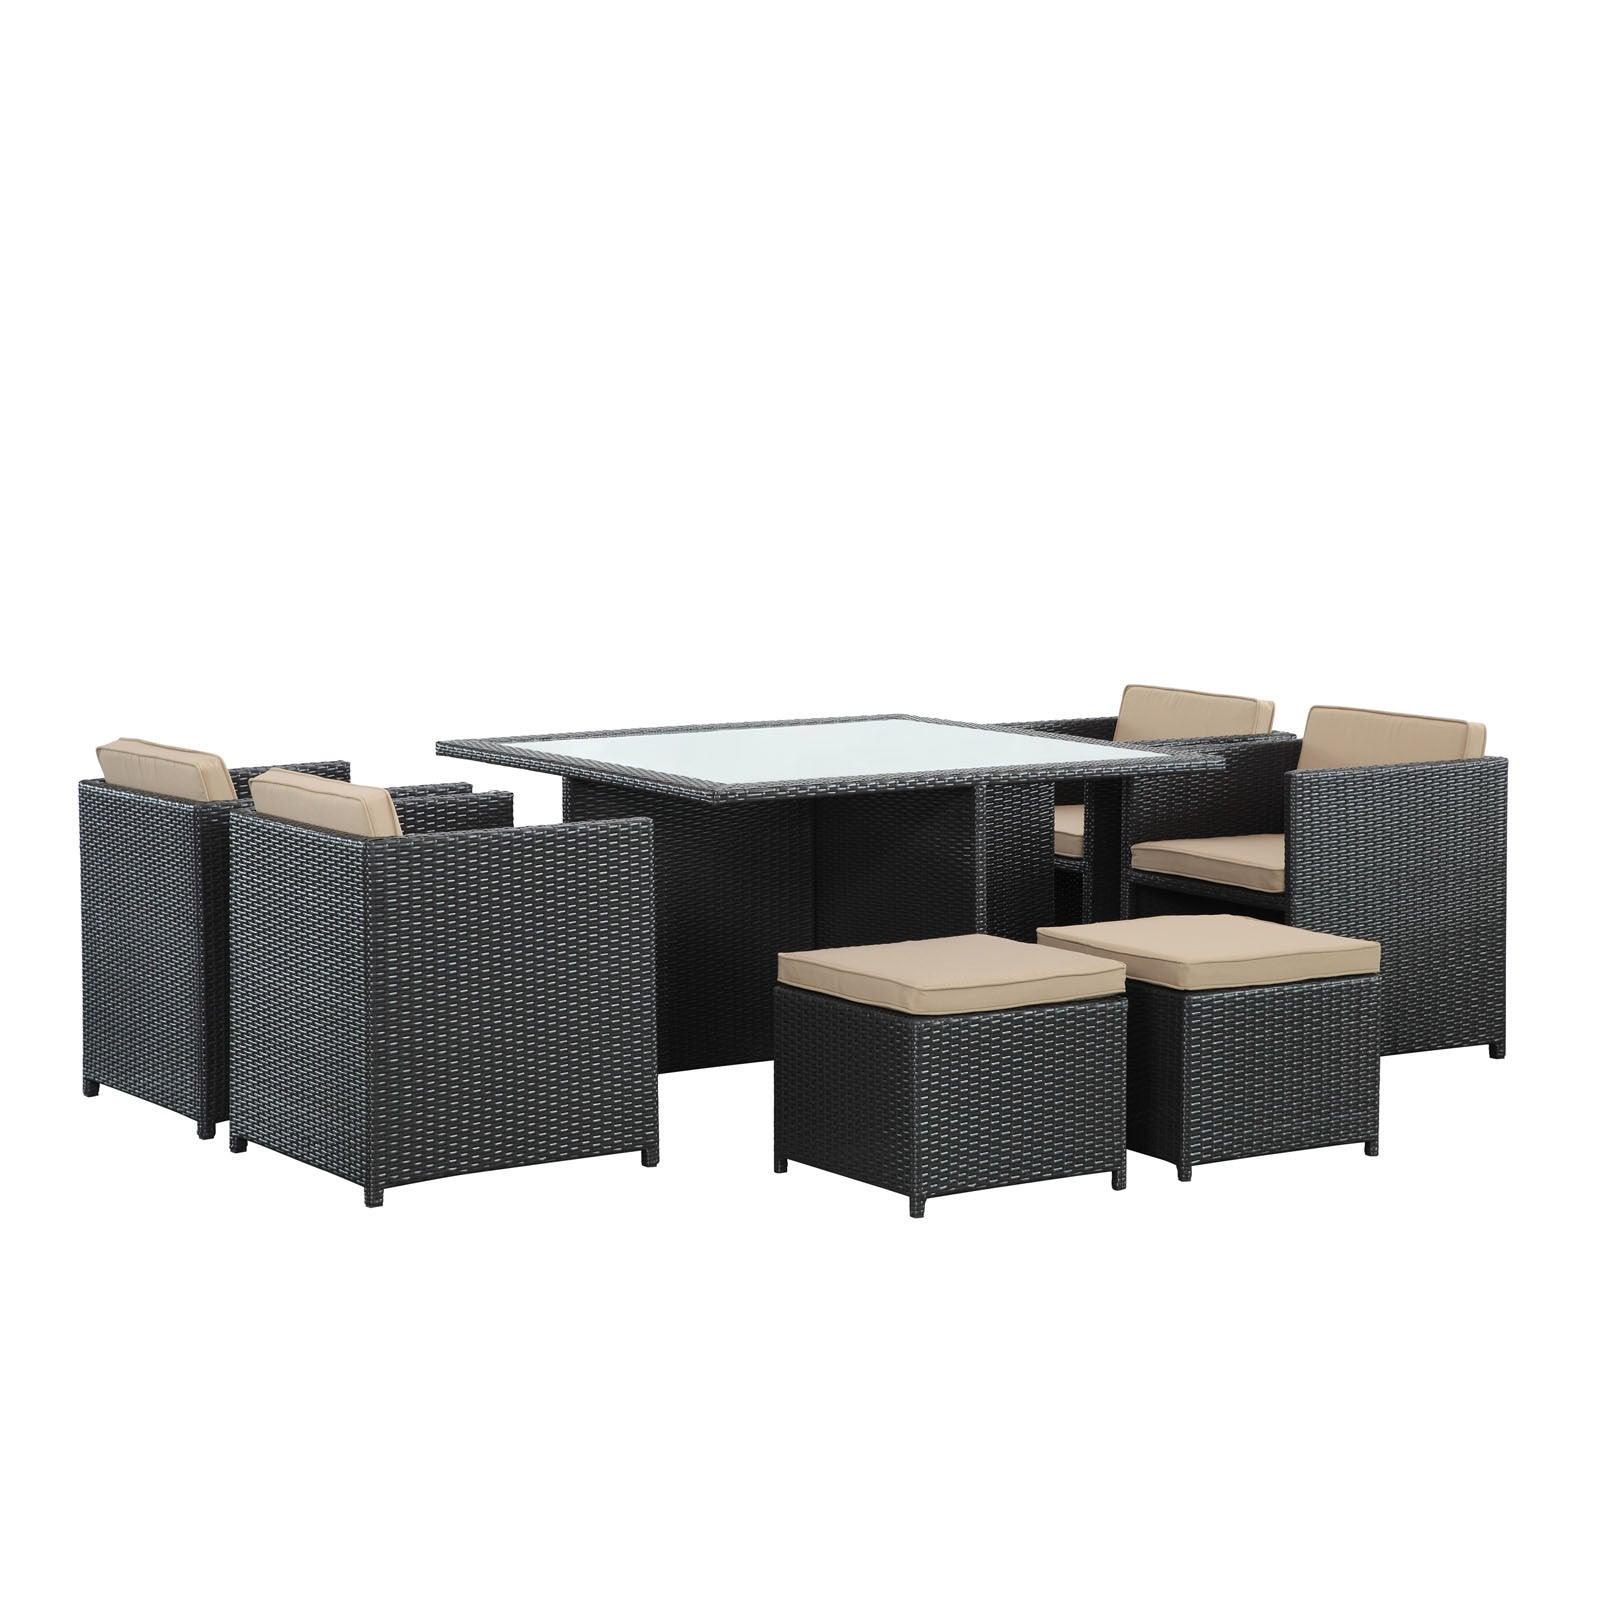 IVY 9 PIECE OUTDOOR PATIO DINING SET - Euro Living Furniture